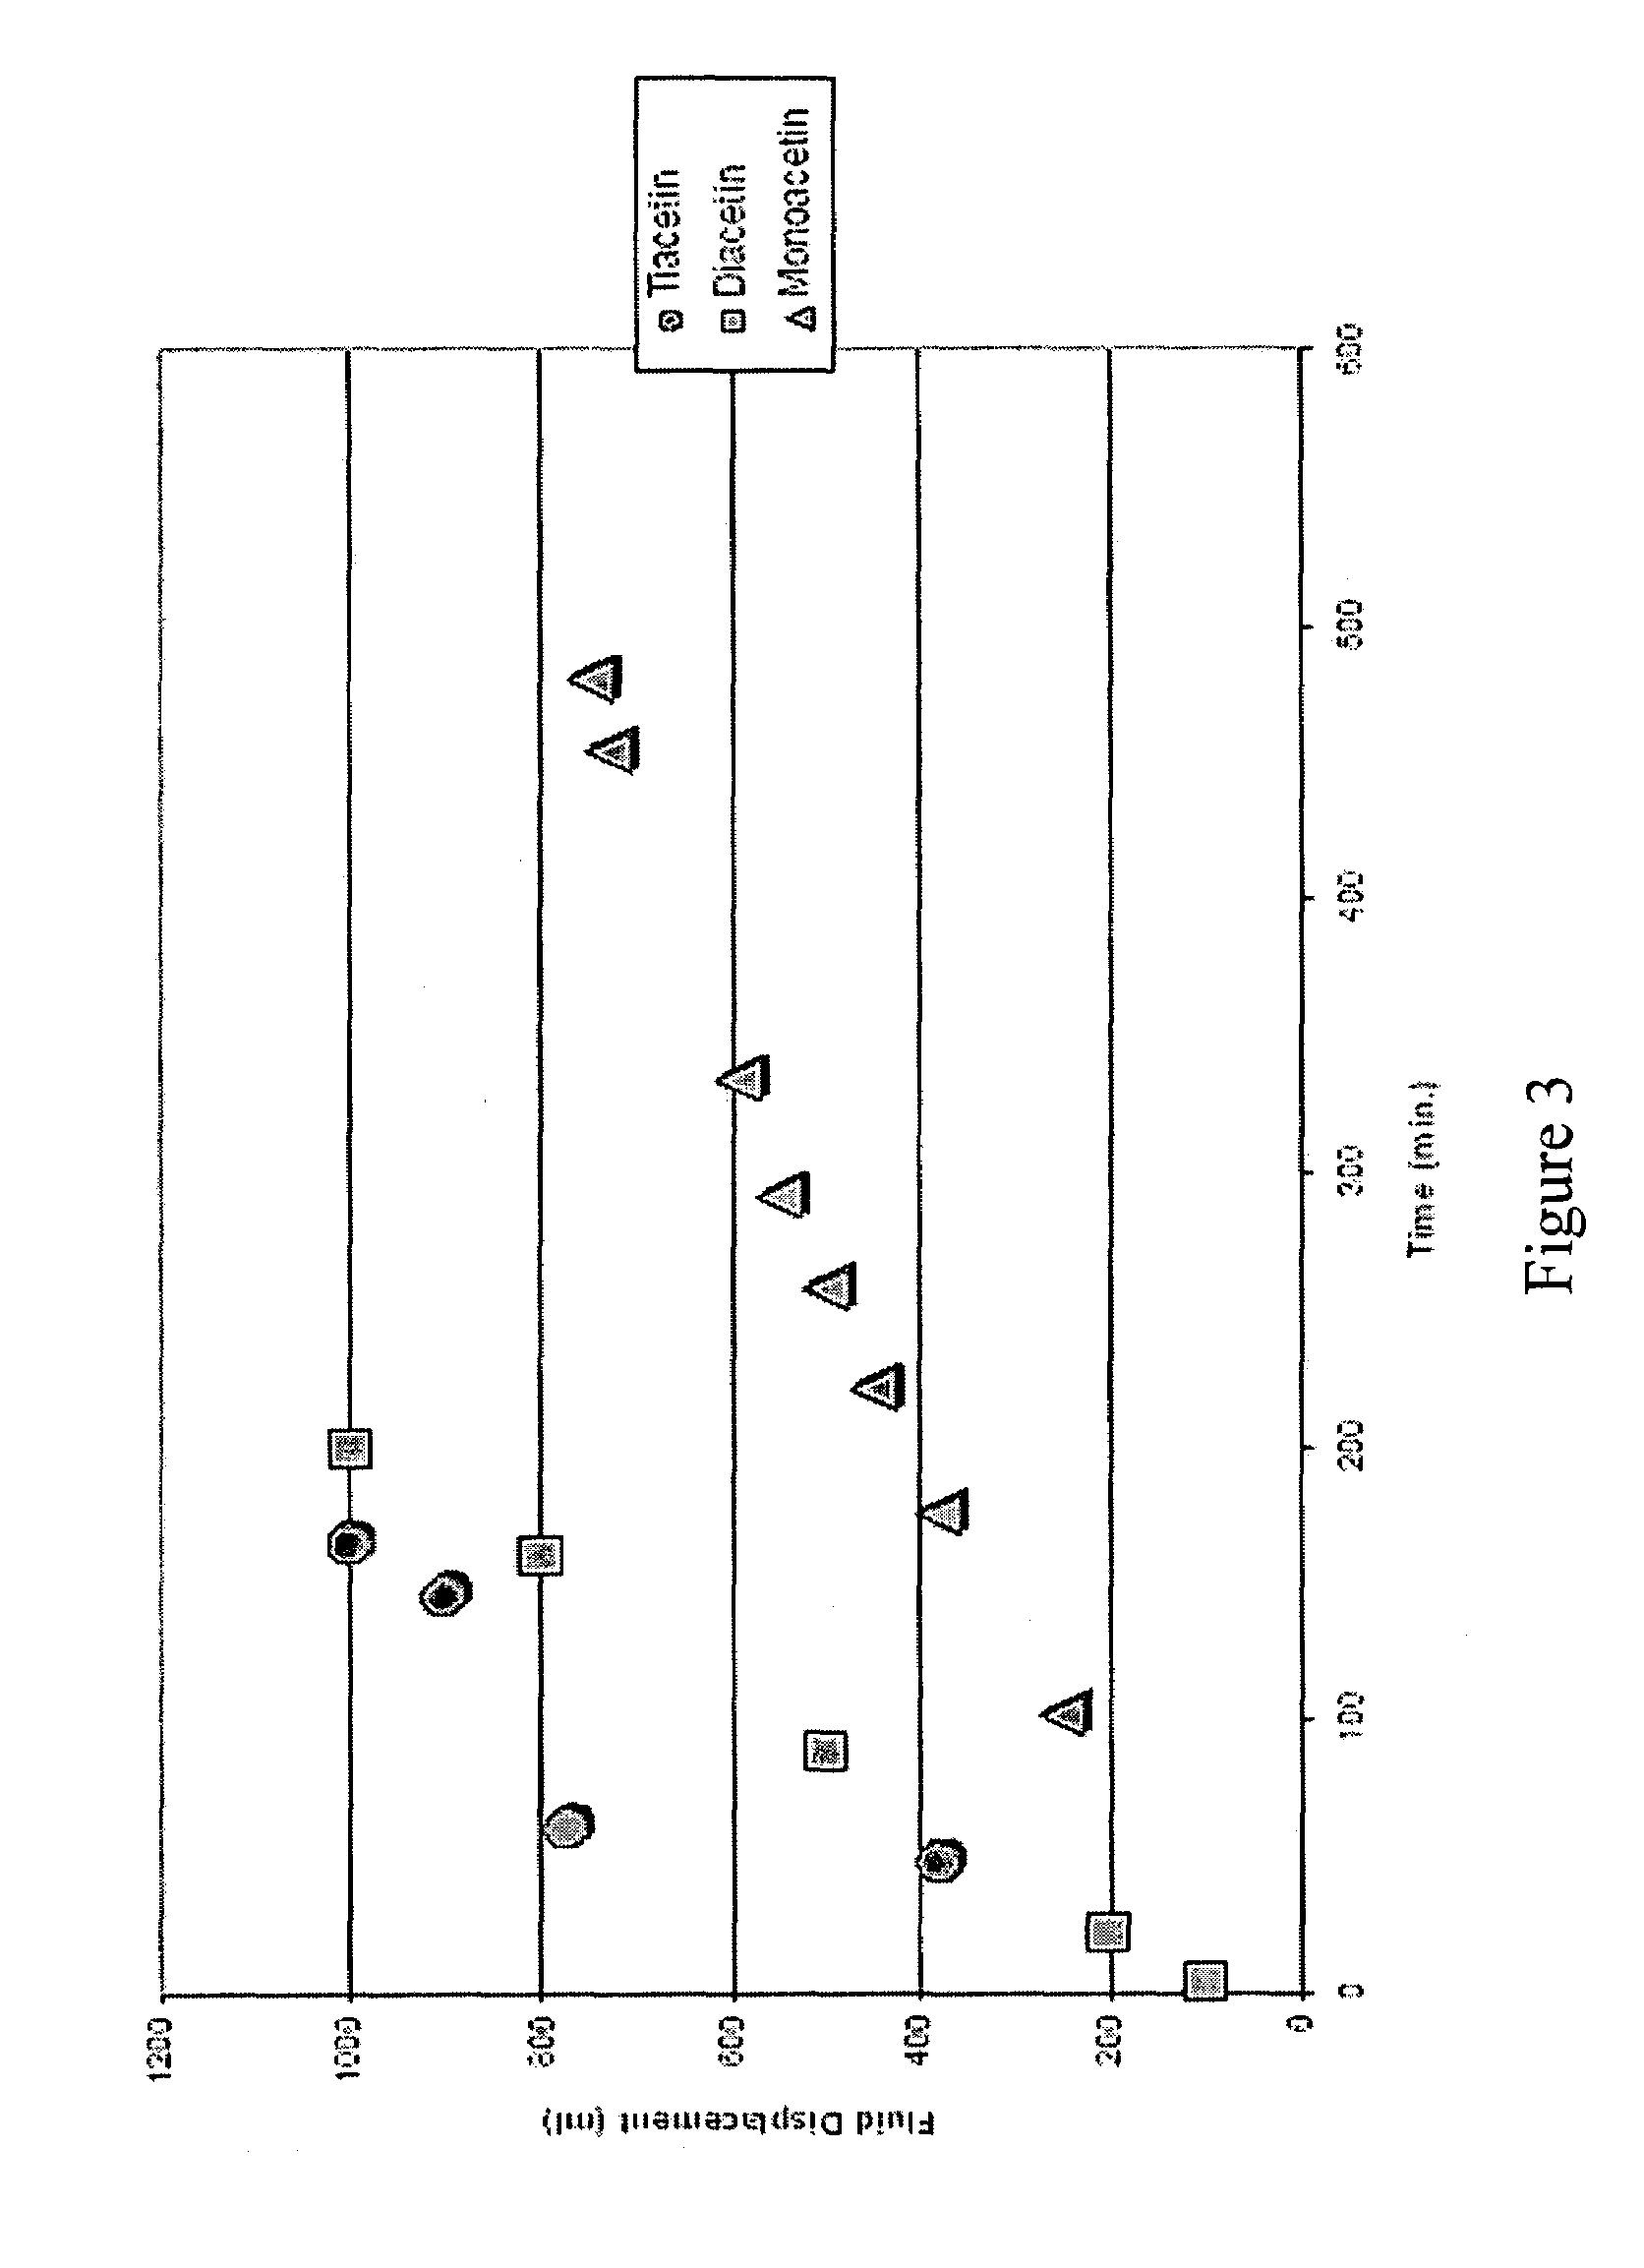 Methods of controlled acidization in a wellbore